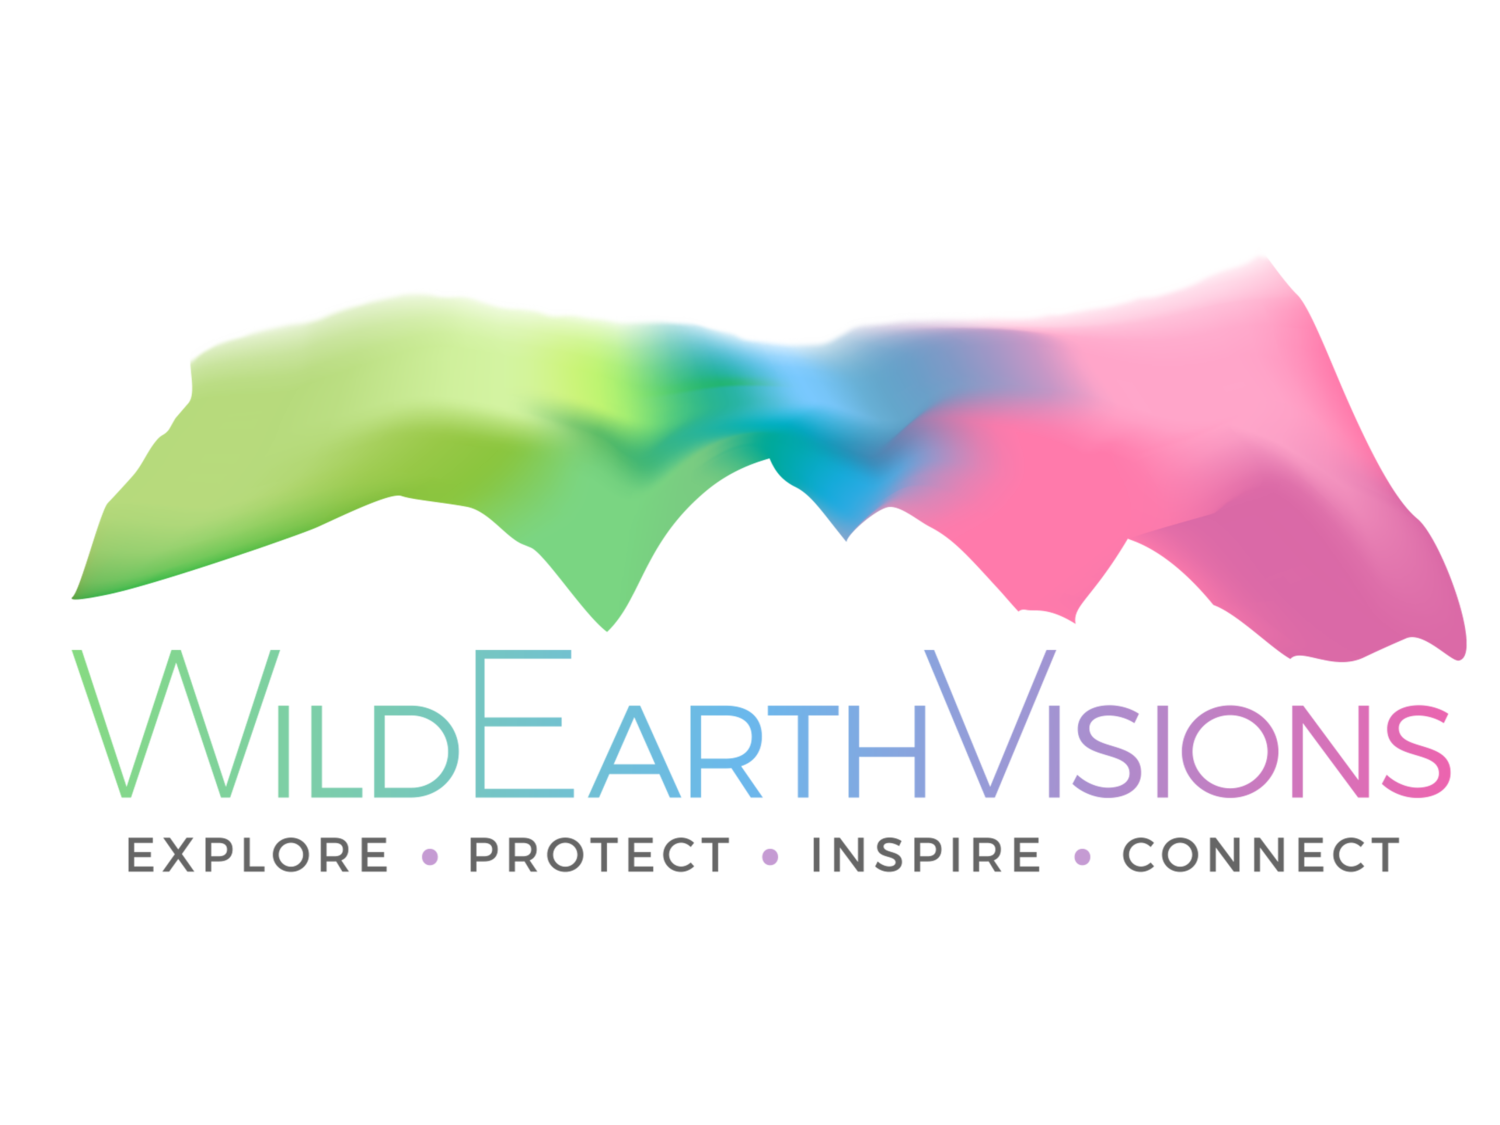 WildEarthVisions